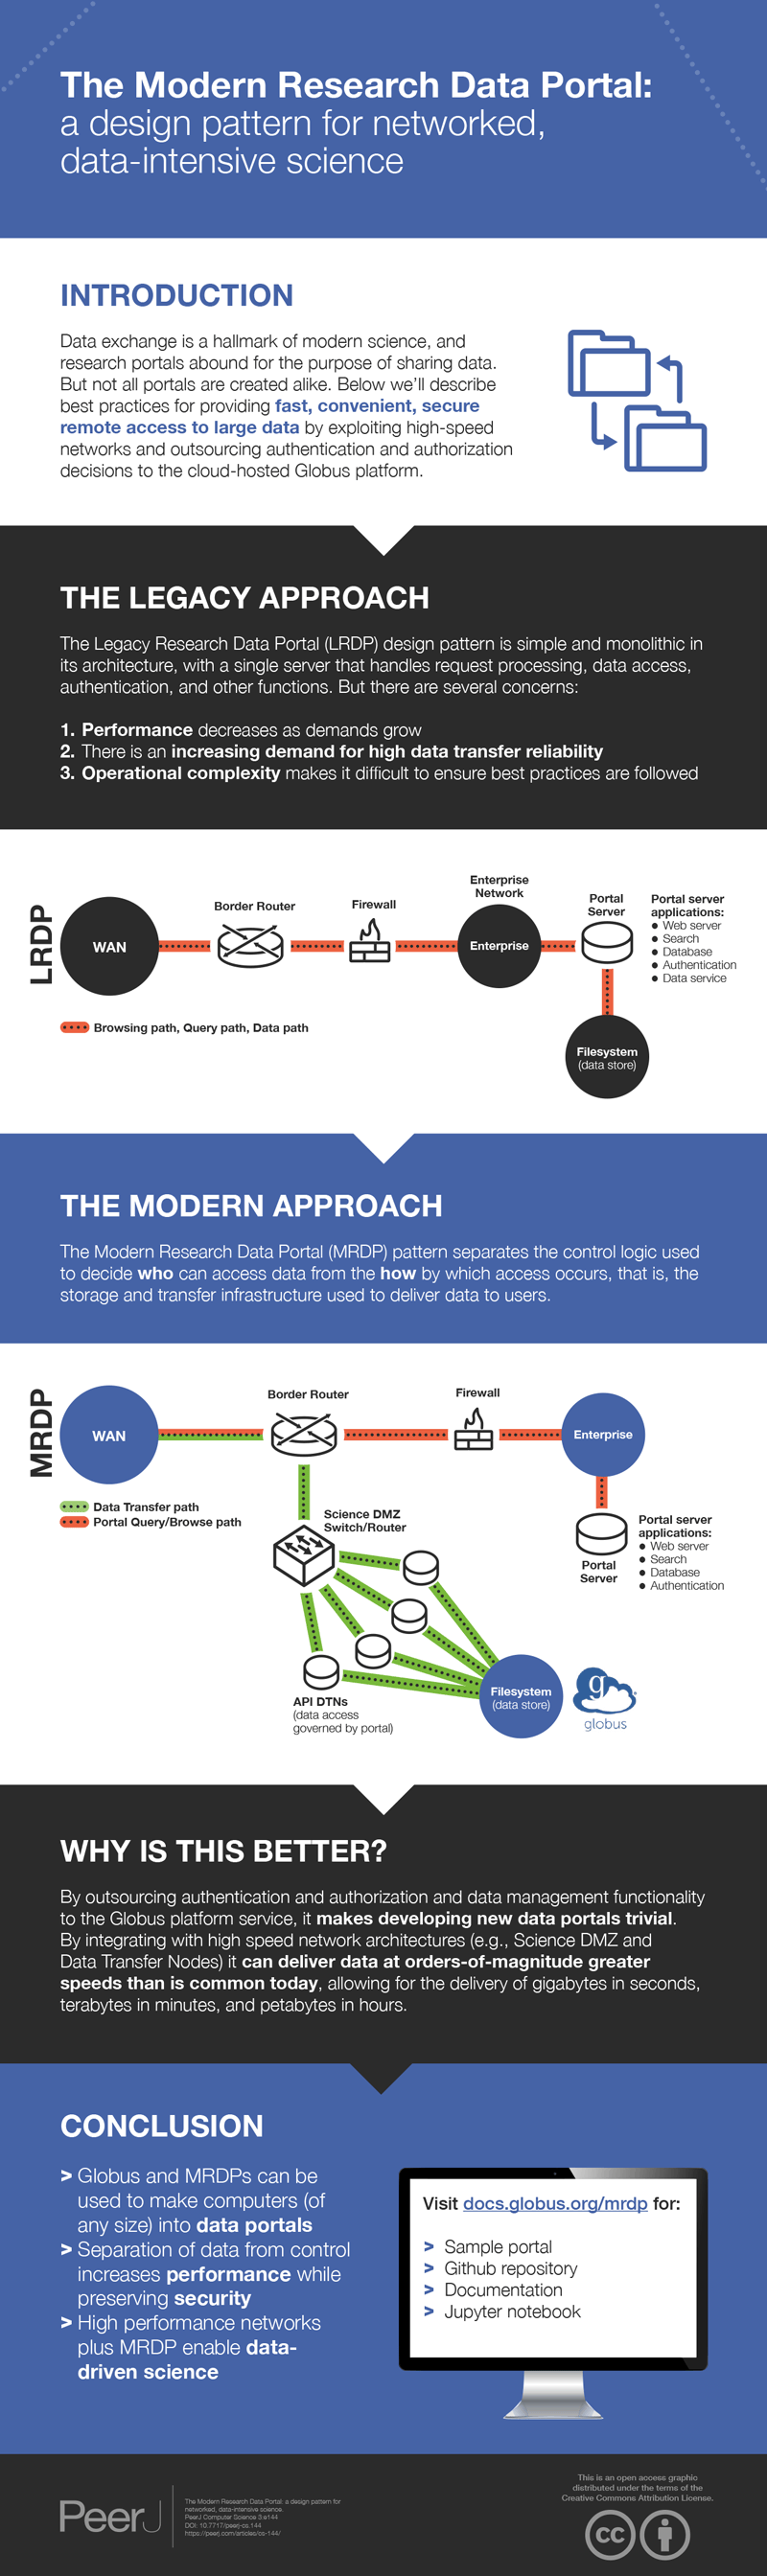 Infographic: Building a Modern Research Data Portal